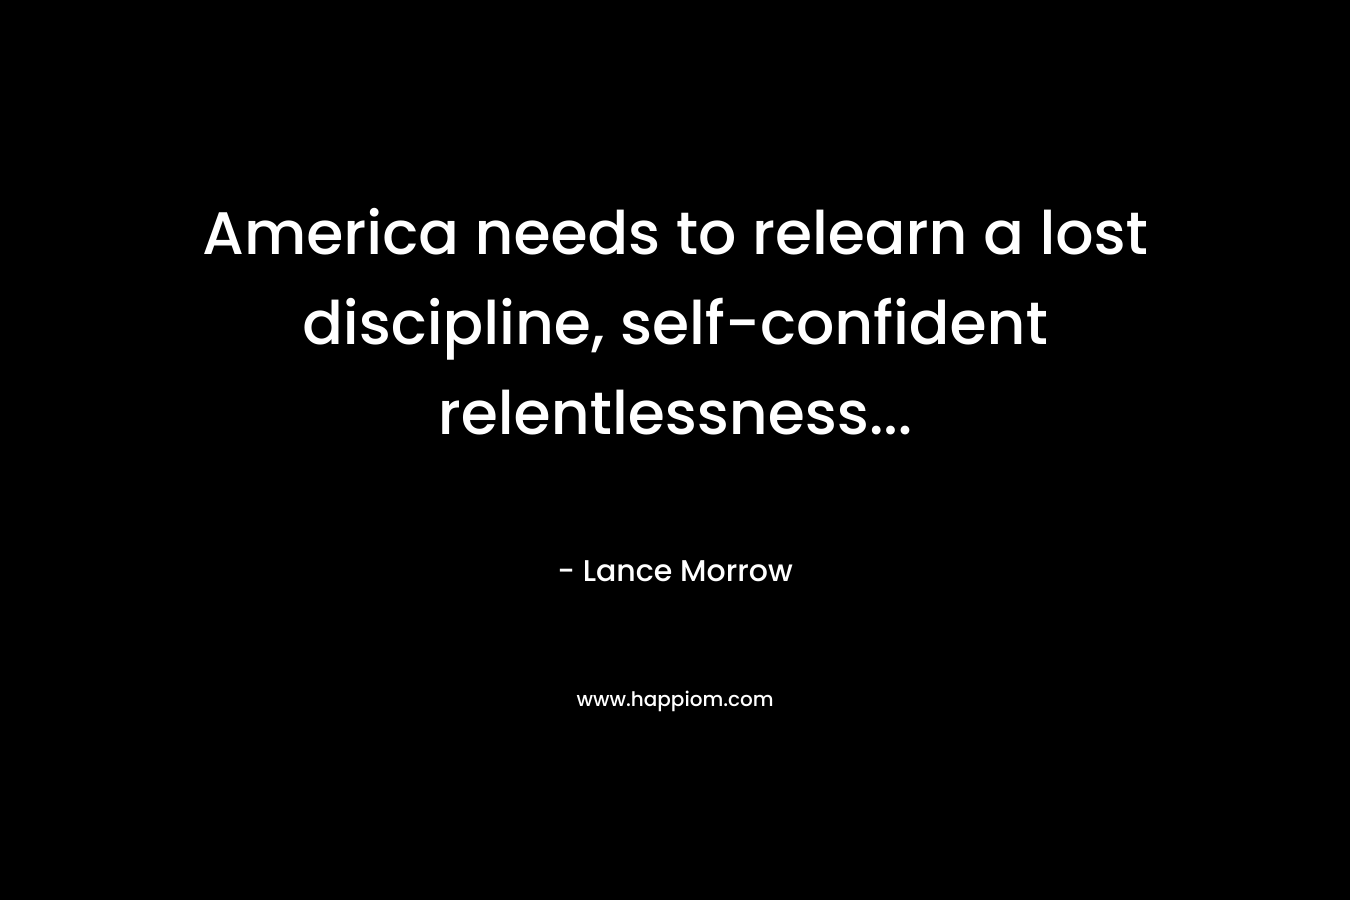 America needs to relearn a lost discipline, self-confident relentlessness… – Lance Morrow